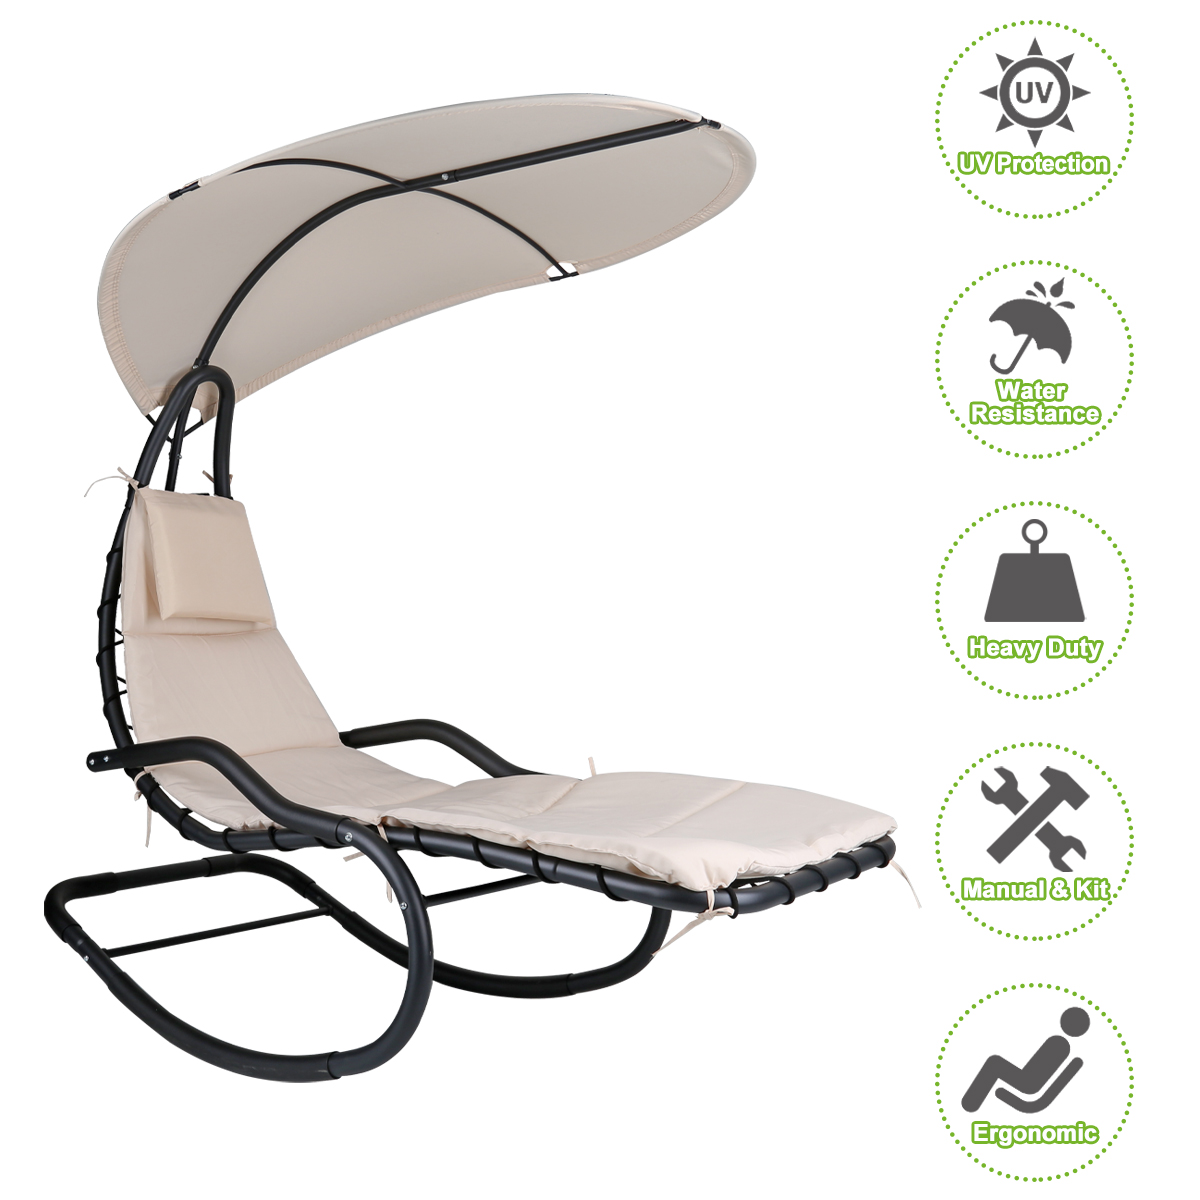 Rocking Hanging Lounge Chair - Curved Chaise Rocking Lounge Chair Swing For Backyard Patio w/ Built-in Pillow Removable Canopy with stand {Beige} - image 5 of 8